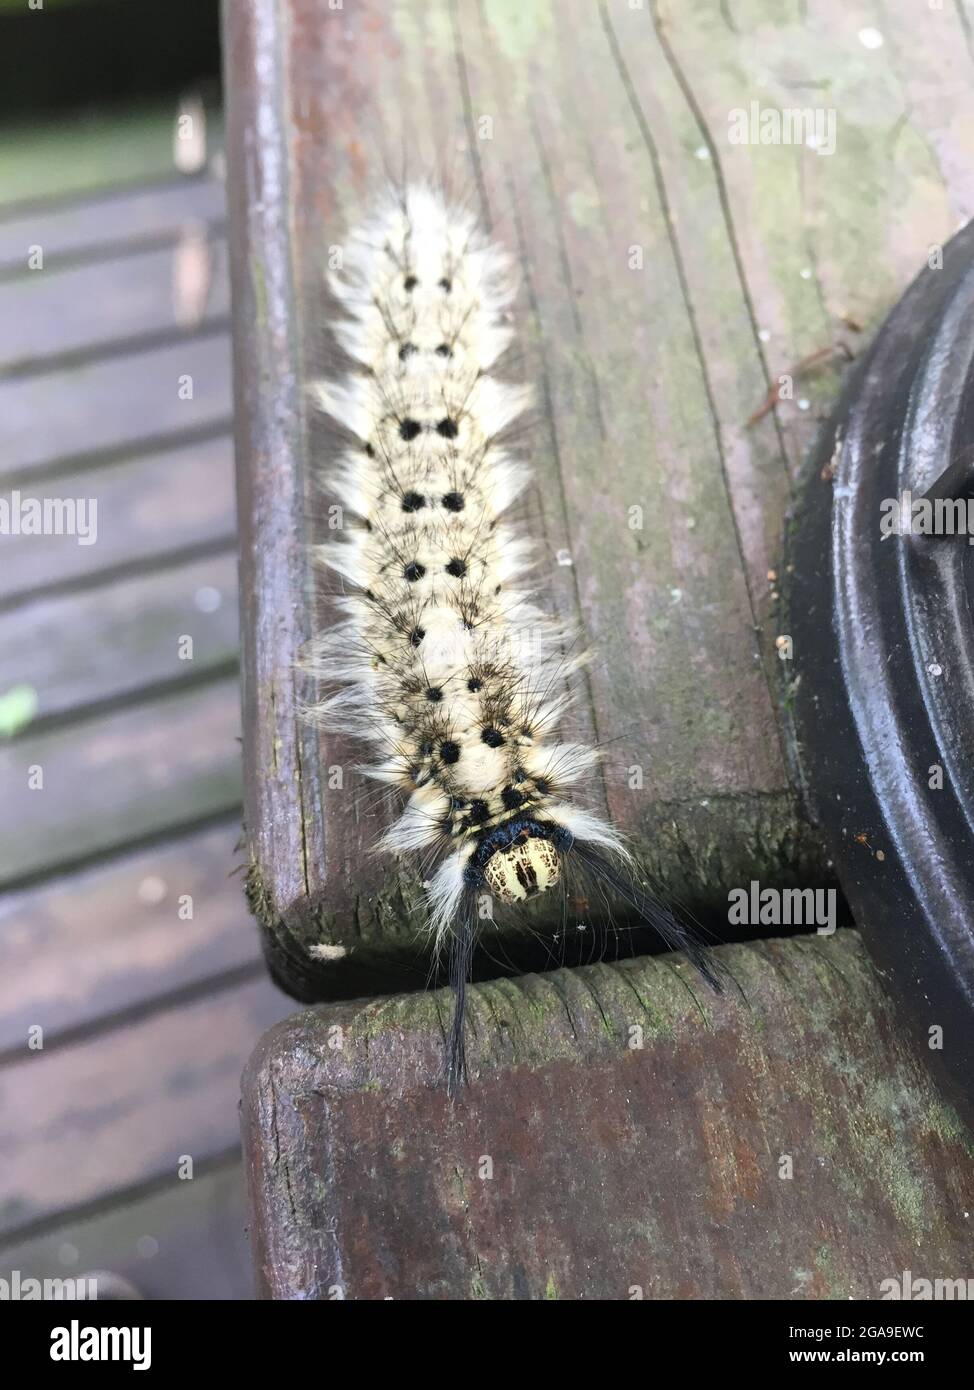 A fuzzy caterpillar in the forest in Taiwan Stock Photo